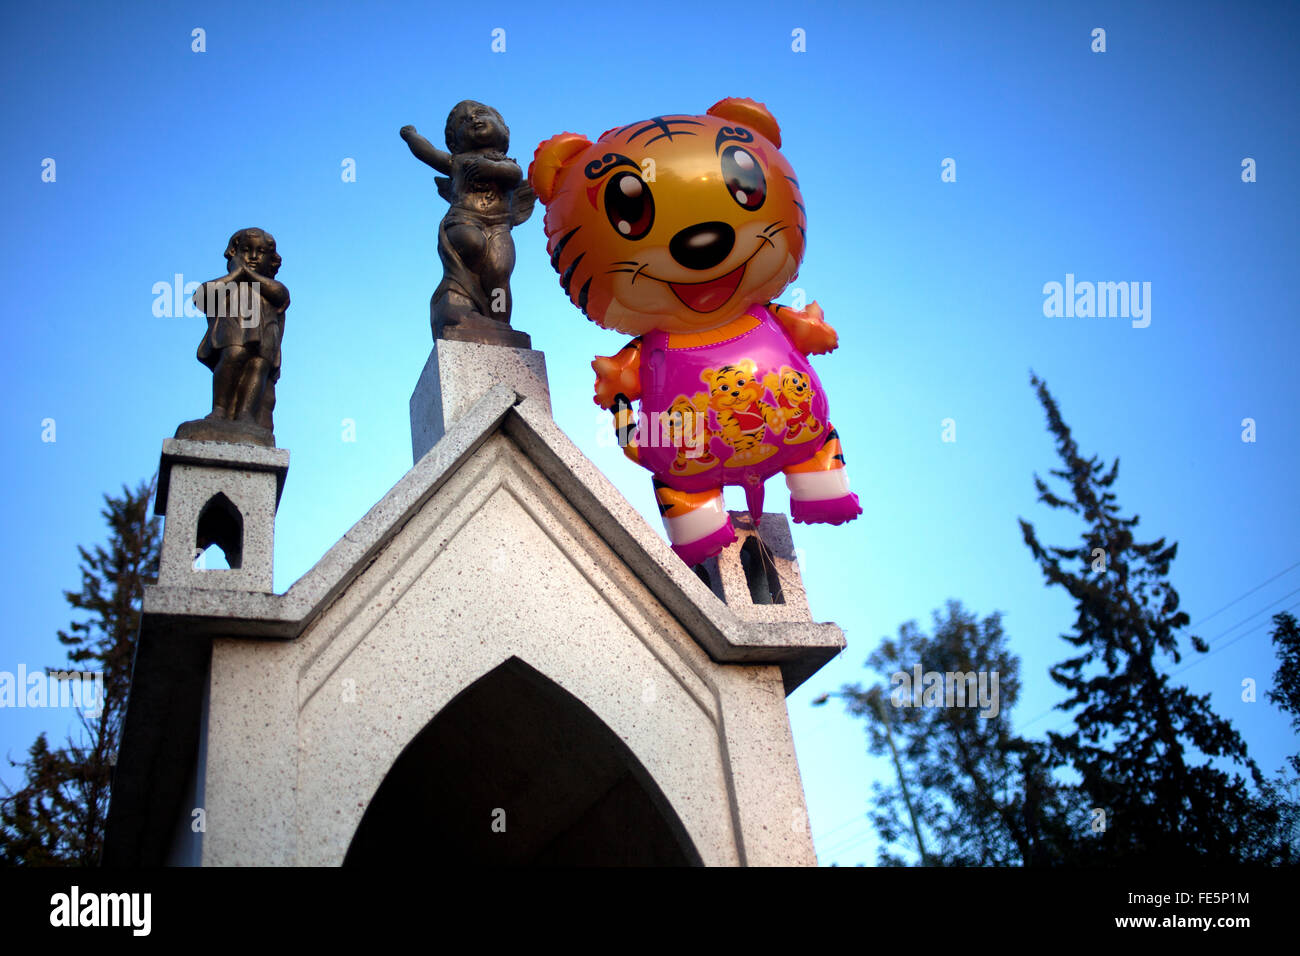 A balloon in the shape of a teddy bear decorates a tomb at the cemetery in San Gregorio Atlapulco, Xochimilco Stock Photo